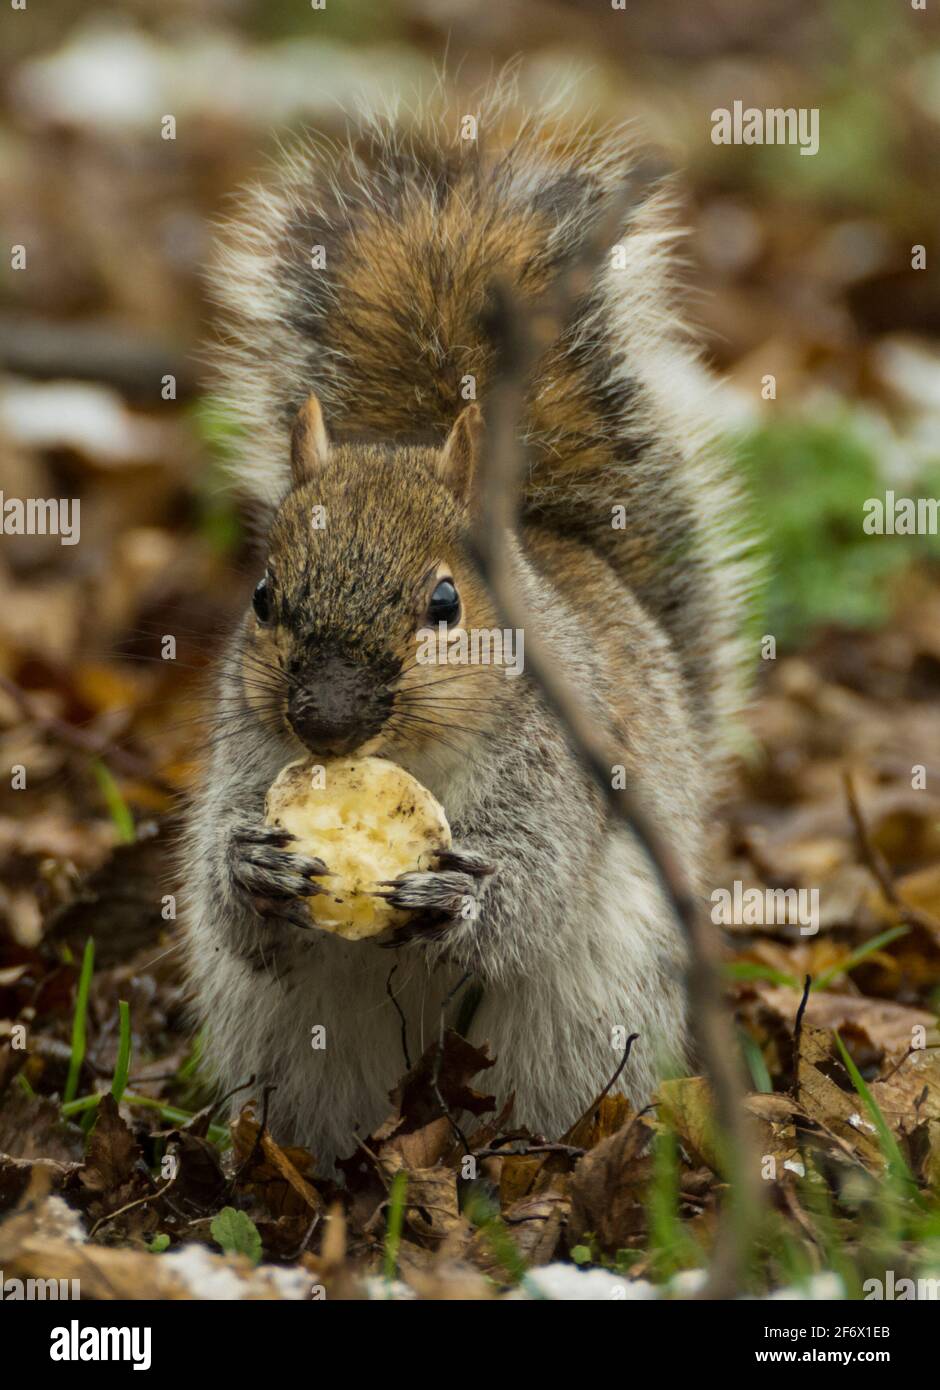 Close up of a grey squirrel (Sciurus carolinensis) with muddy nose and paws eating a piece of banana. UK Stock Photo